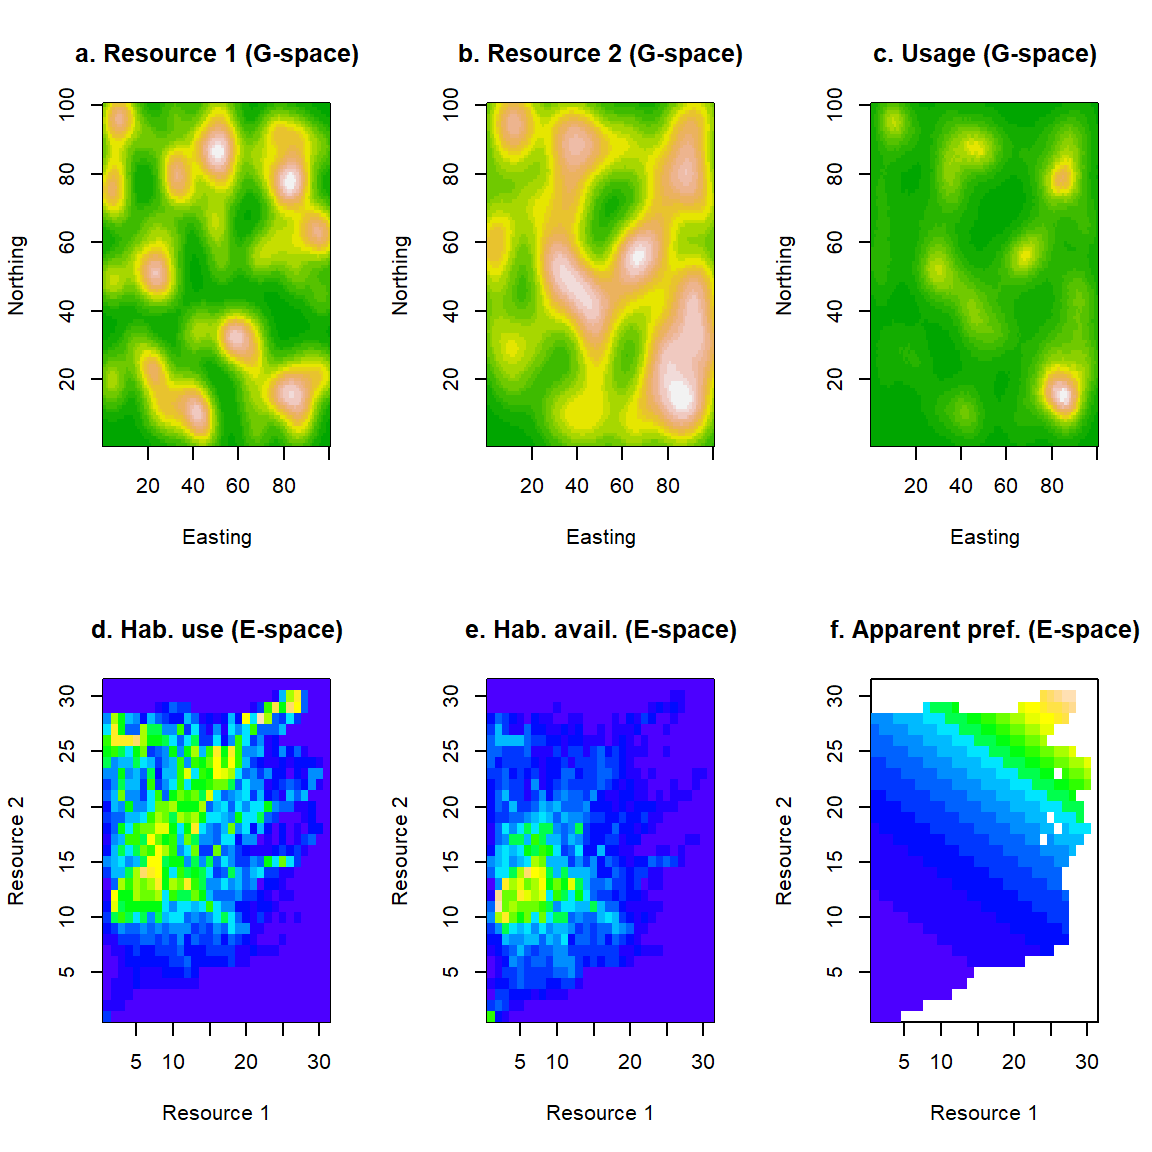 An example of use and availability of habitats in geographical and environmental space. We consider two geographical layers (a and b) representing the geographical distribution of two resources. On those, we superimpose the utilisation distribution (c) of a hypothetical animal. We can recast this information into environmental space. Usage of habitats in E-space (d) is, essentially, a histogram of the frequency with which different resource combinations are used by the animal. Similarly, the availability of habitats in E-space (e) is the frequency with which different combinations of resource abundances occur in the environment. A measure of apparent habitat preference (f) can be obtained by dividing habitat use (d) by habitat availability (e). Here, white space indicates division by zero (i.e. non-existent habitats).